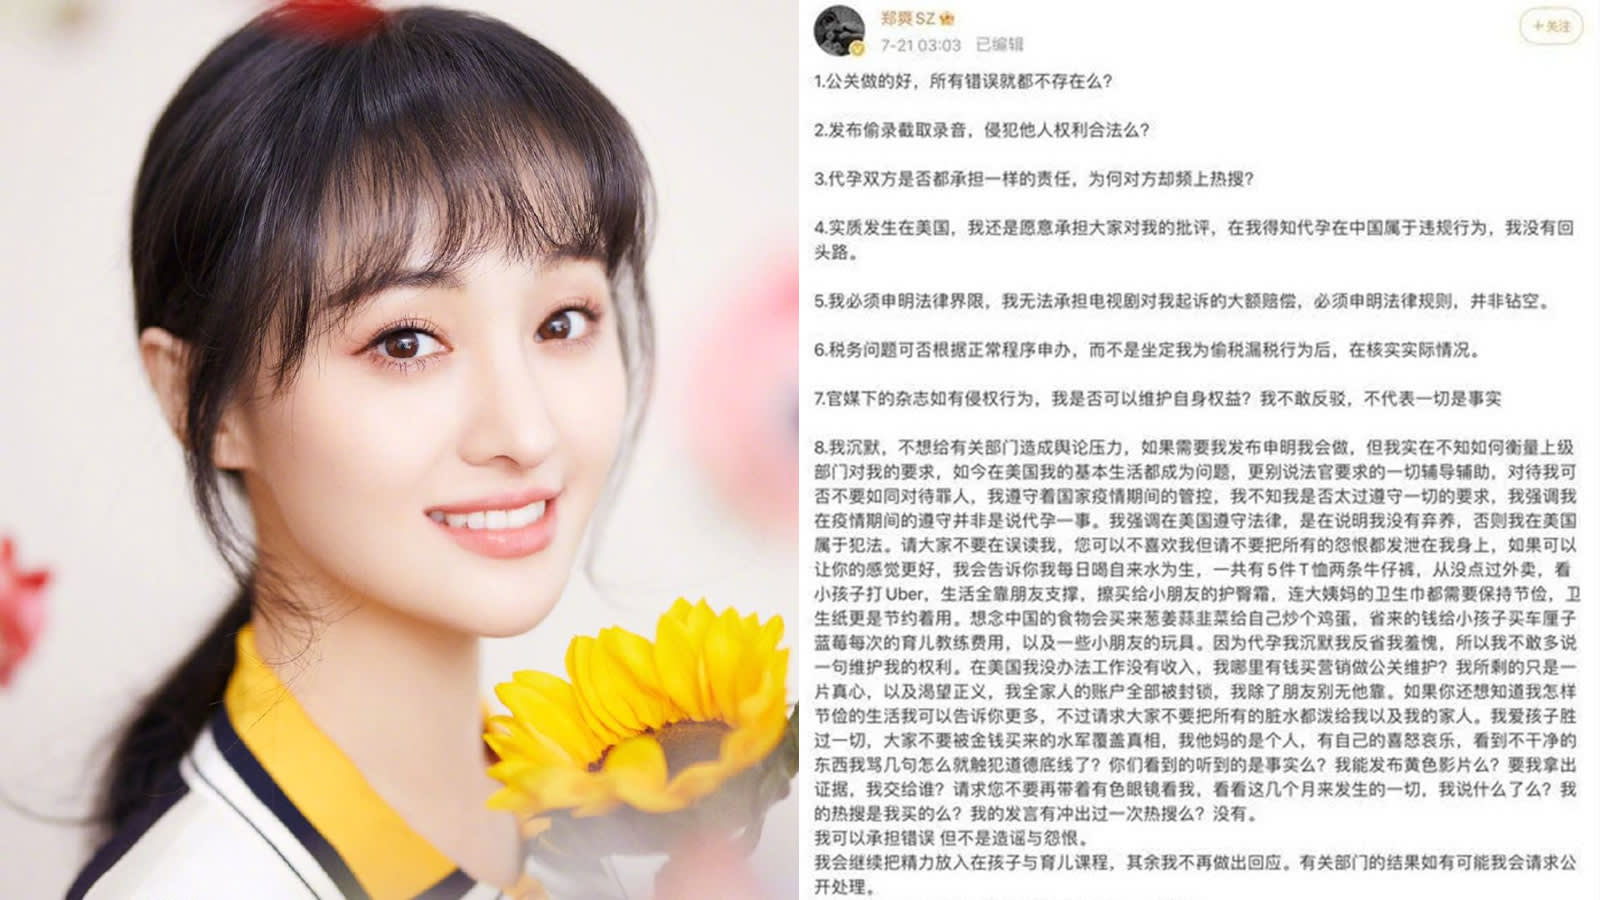 Zheng Shuang Now Living In The US; Claims She Has To “Drink Tap Water To Survive” & Be Frugal With Toilet Paper